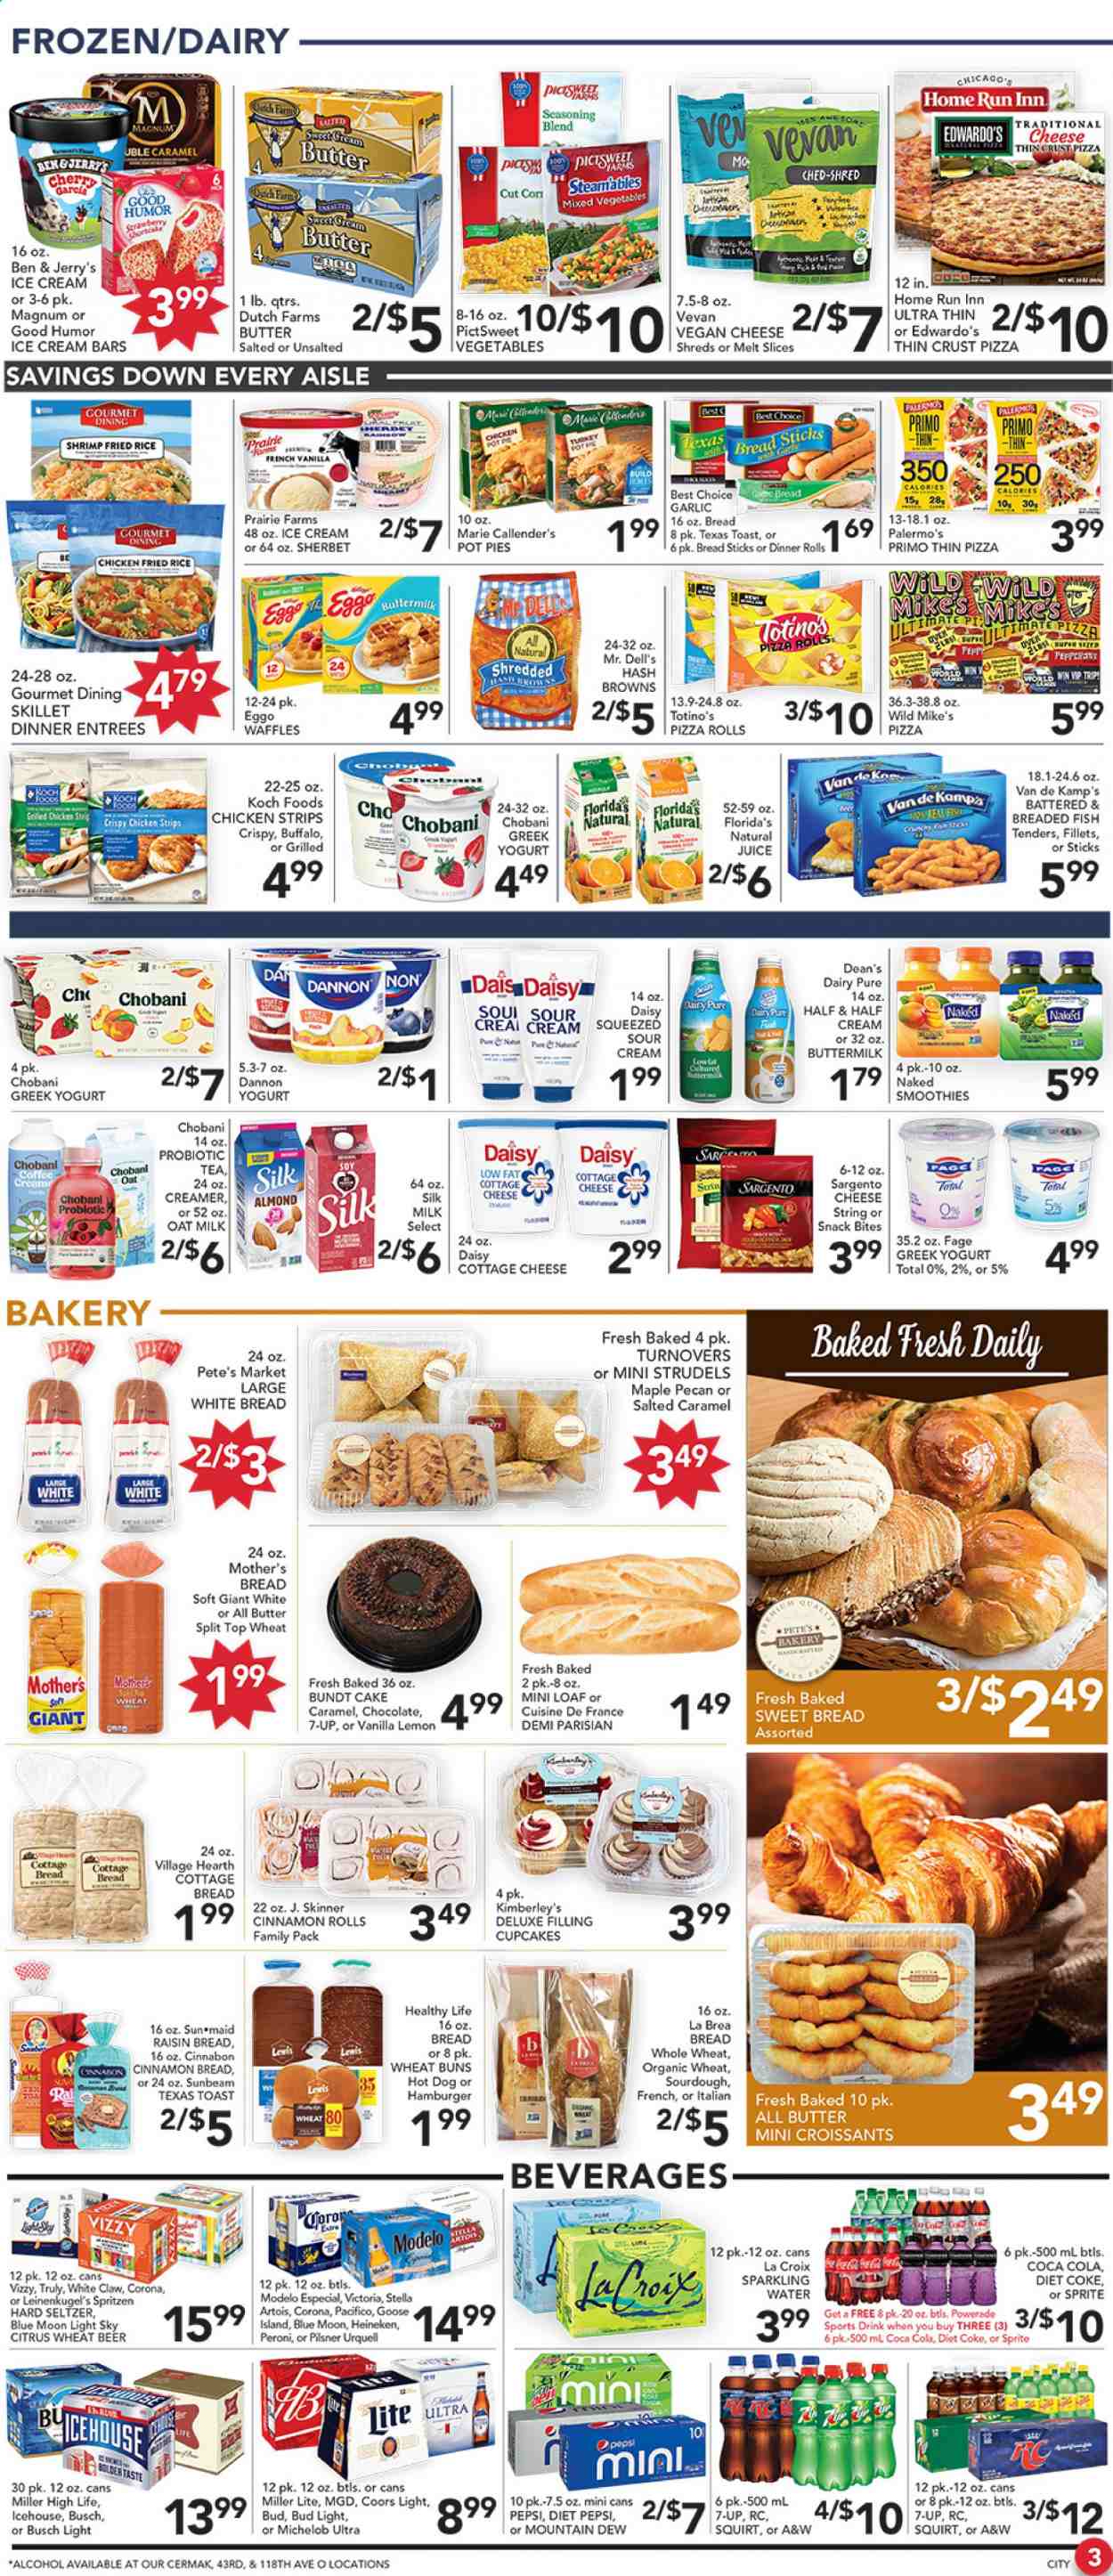 thumbnail - Pete's Fresh Market Flyer - 01/13/2021 - 01/19/2021 - Sales products - bread, cottage bread, white bread, pie, pizza rolls, dinner rolls, croissant, buns, turnovers, bundt, cinnamon roll, cupcake, pot pie, sweet bread, waffles, pastries, mixed vegetables, snack, shrimps, Van de Kamp's, hot dog, hamburger, fried chicken, chicken strips, Marie Callender's, breaded fish, ready meal, cottage cheese, shredded cheese, Sargento, vegan cheese, greek yoghurt, Chobani, Dannon, buttermilk, oat milk, sour cream, creamer, half cream, Magnum, ice cream, ice cream bars, Ben & Jerry's, frozen vegetables, strips, hash browns, Florida's Natural, bread sticks, Skinner Pasta, spice, Coca-Cola, Mountain Dew, Sprite, Powerade, Pepsi, energy drink, Diet Pepsi, Diet Coke, soft drink, 7UP, A&W, Coke, electrolyte drink, smoothie, water, carbonated soft drink, tea, White Claw, Hard Seltzer, TRULY, beer, Busch, Stella Artois, Bud Light, Corona Extra, Heineken, Peroni, Modelo, wheat beer, Leinenkugel's, Miller Lite, Coors, Blue Moon, Michelob, Pilsner Urquell. Page 3.